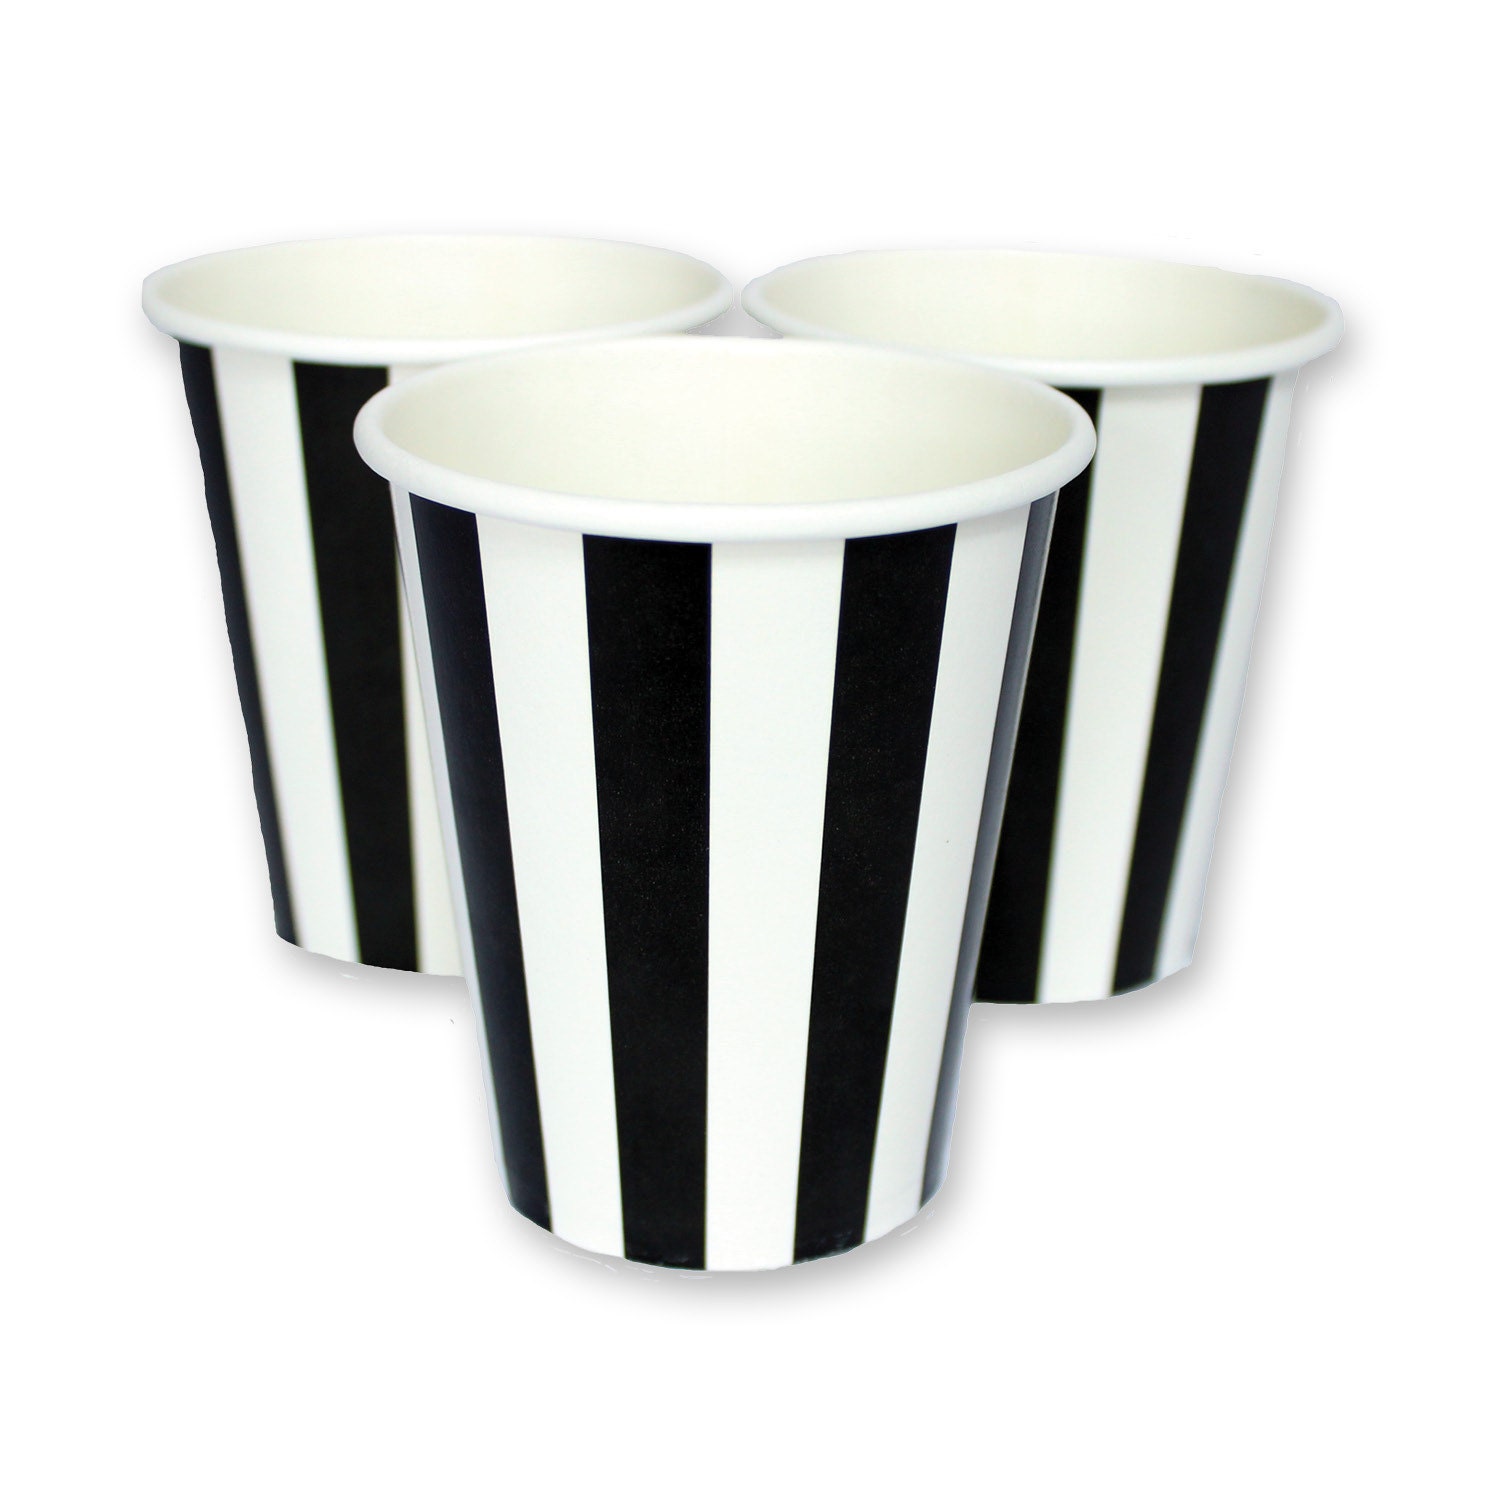 Black & White Striped Paper Cup 12 pack by PartySparklePop